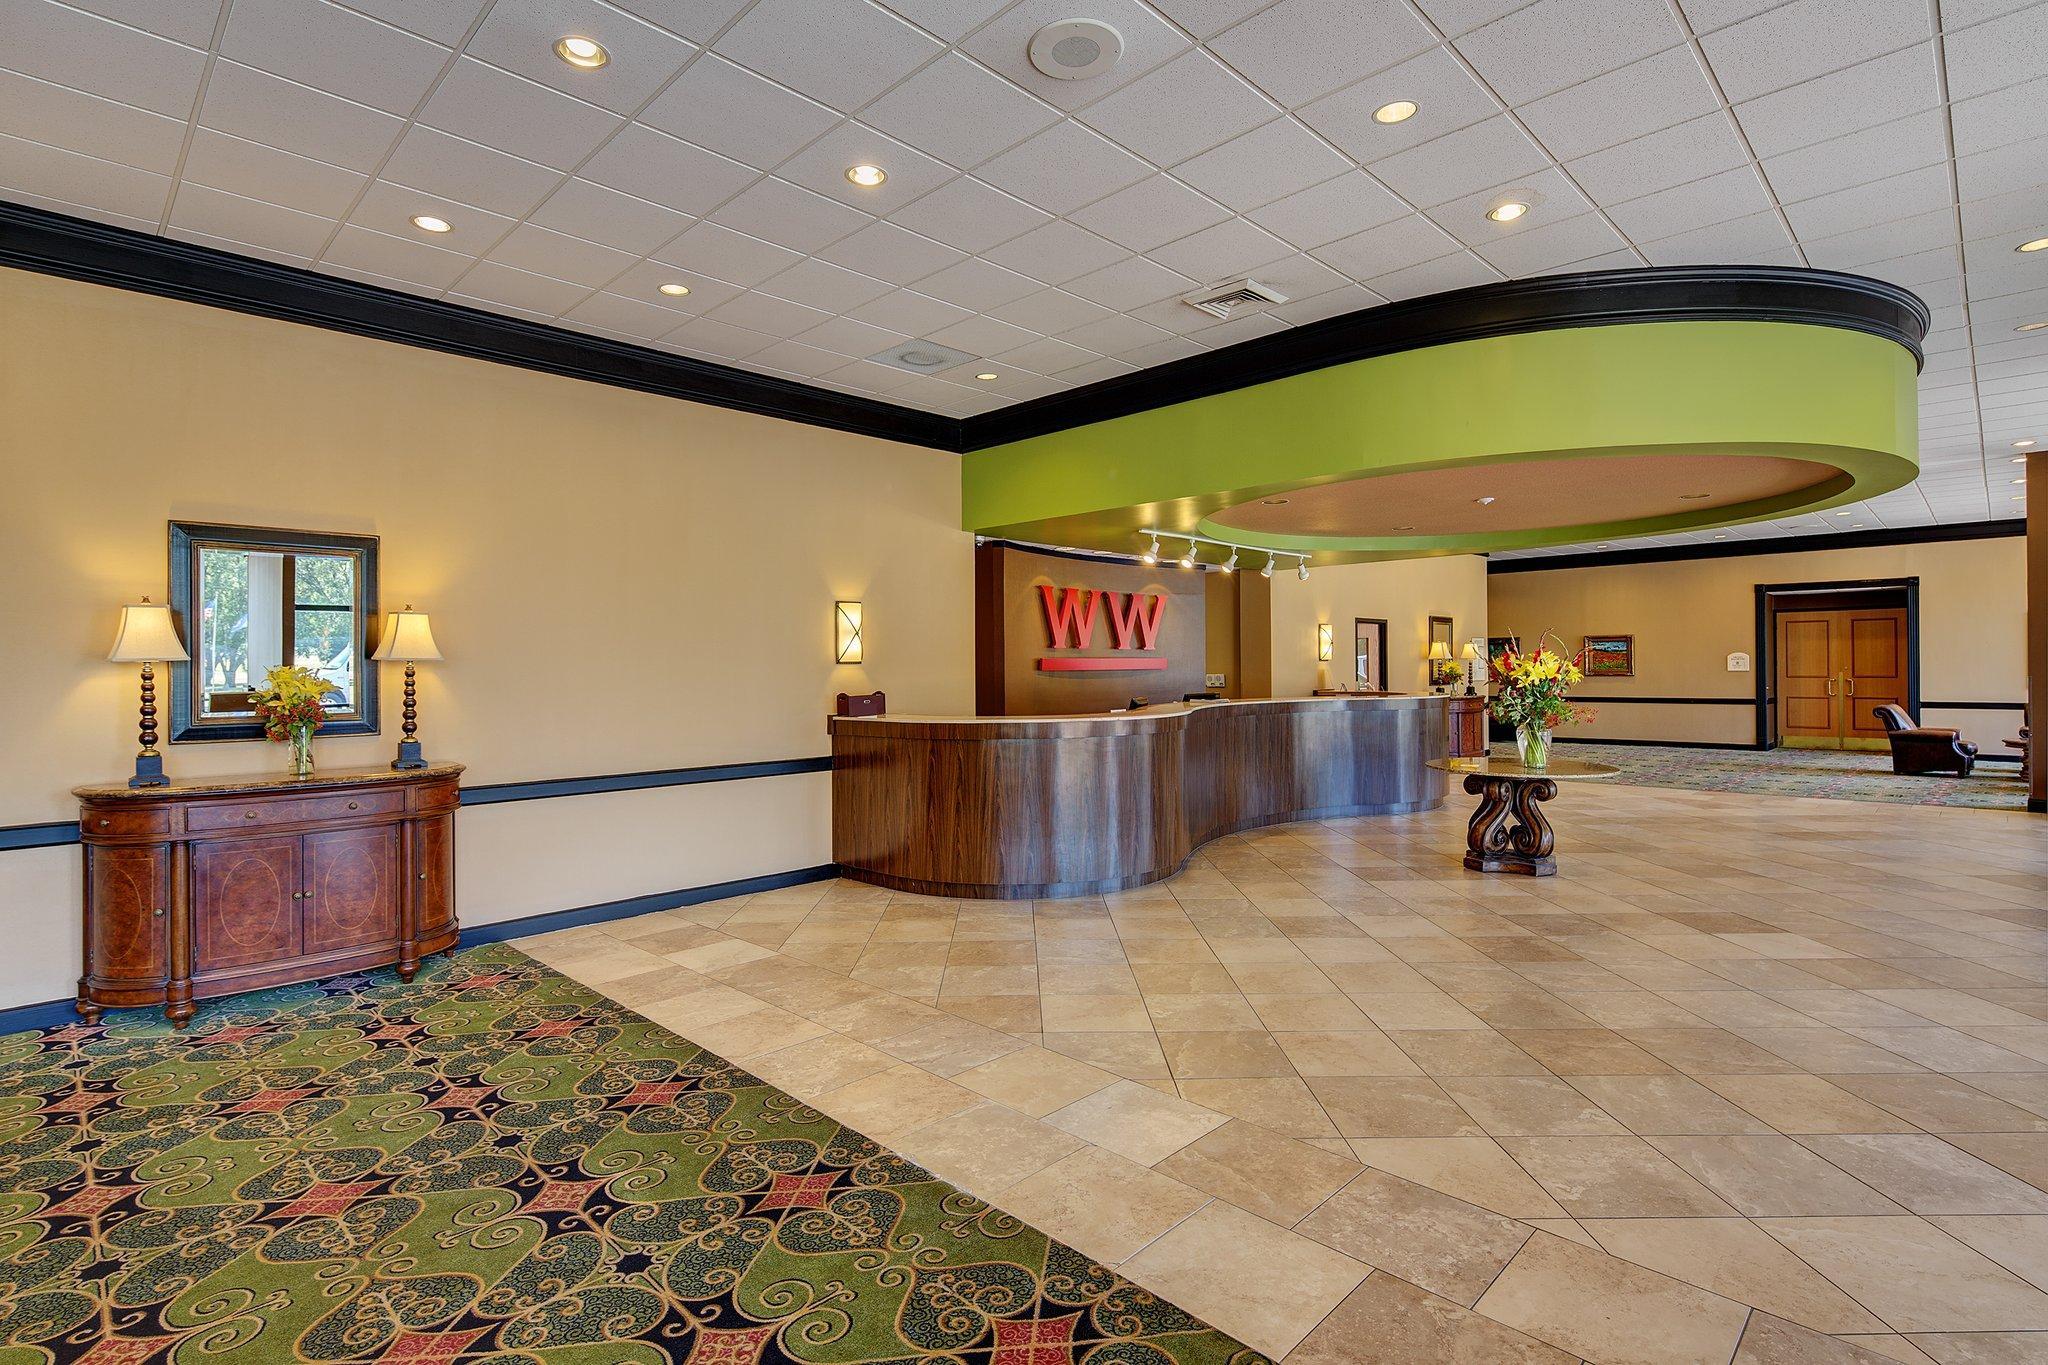 WHISPERING WOODS HOTEL AND CONFERENCE CENTER